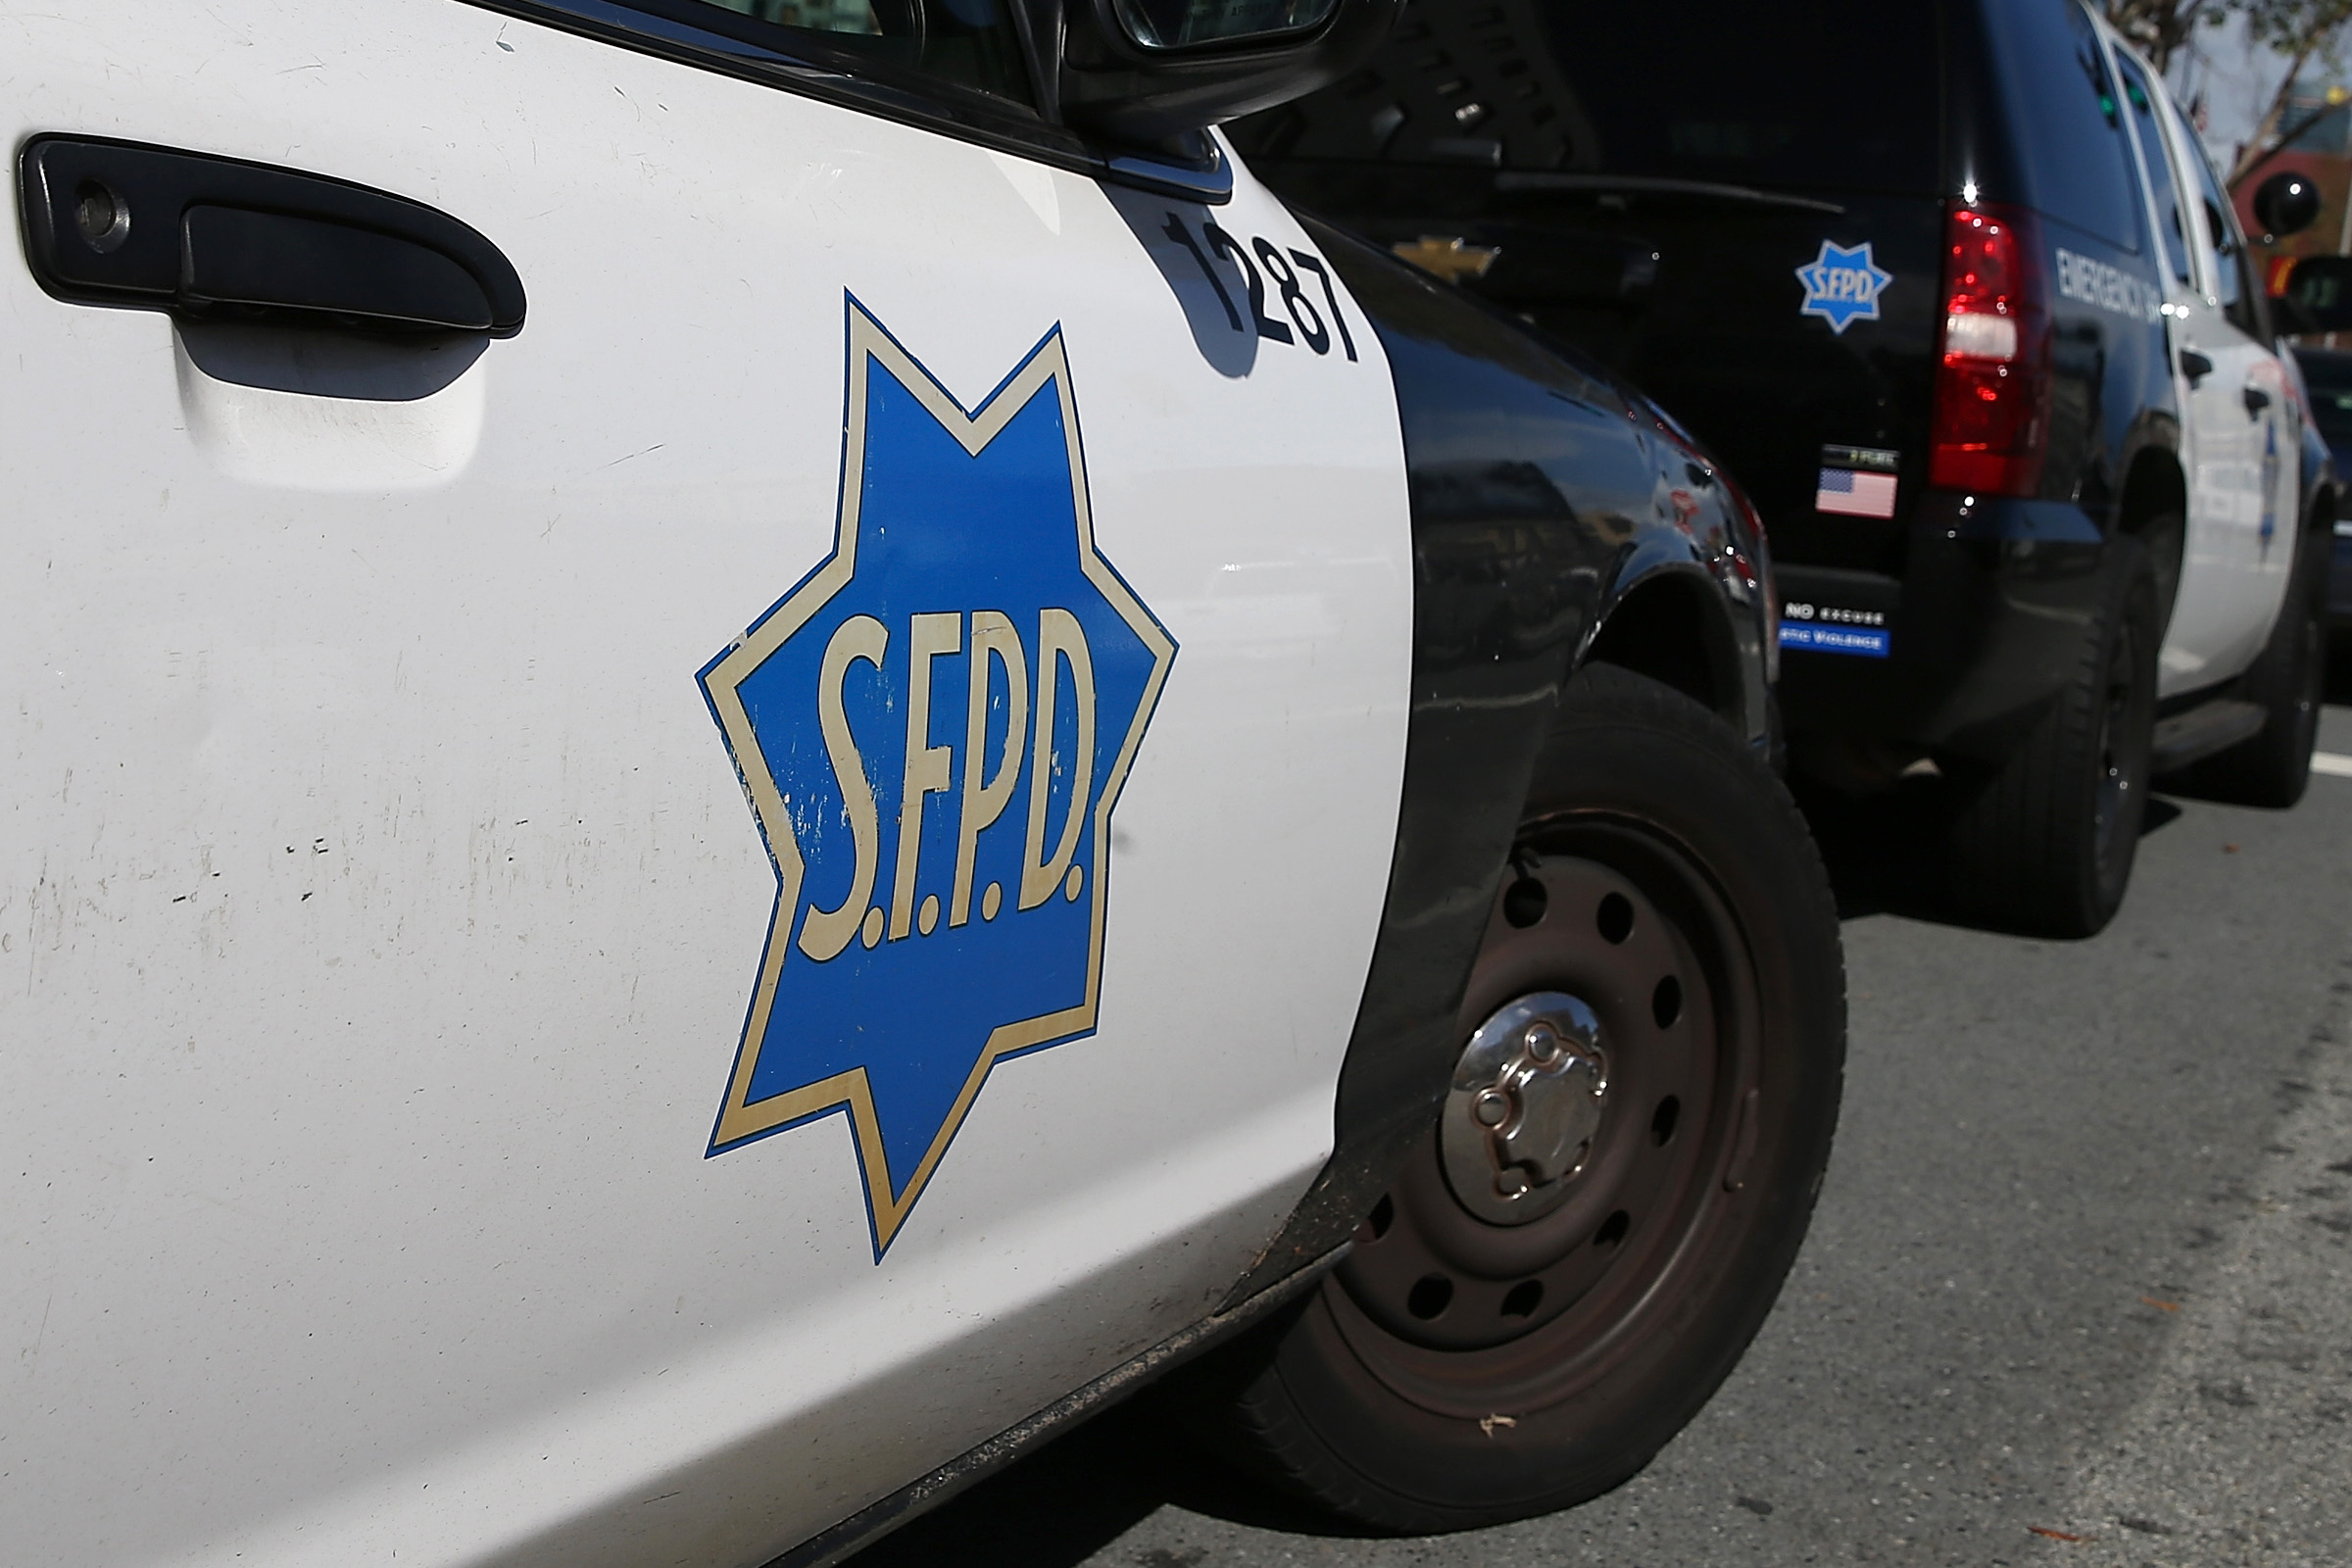 San Francisco Police Arrest Suspect After Stolen Car Chase in Cow Hollow